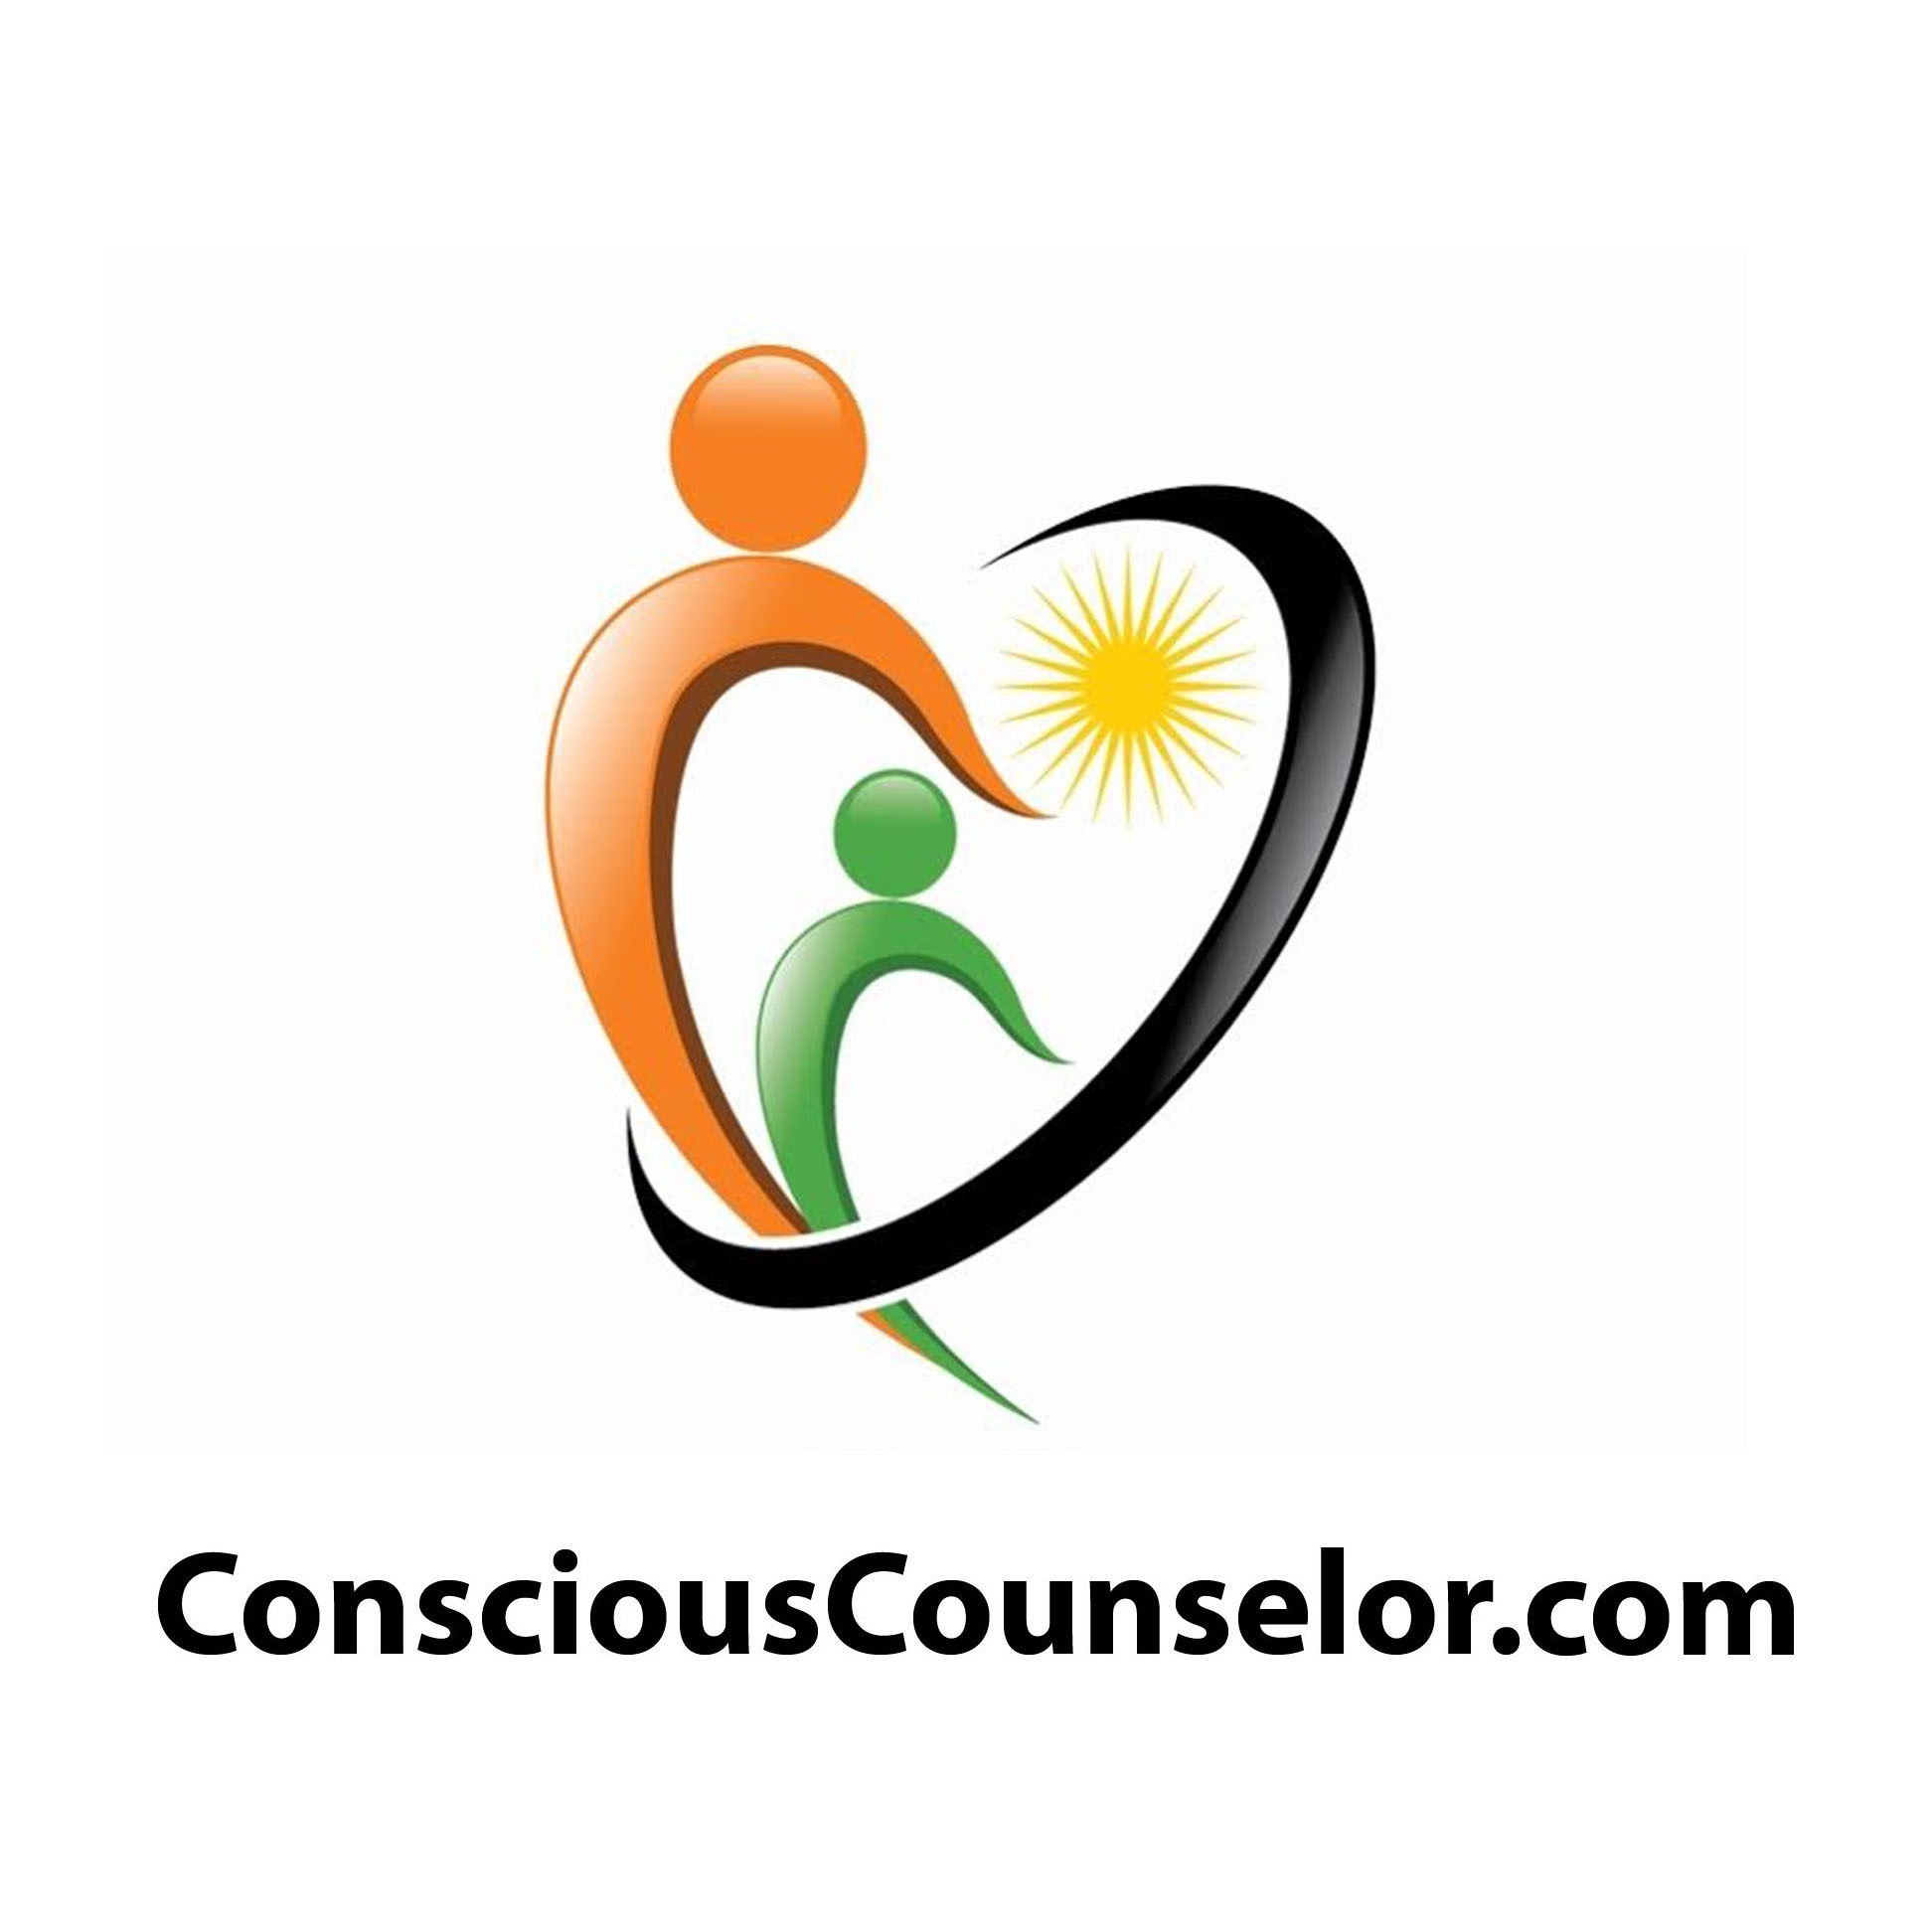 Conscious Counselor releases a new video on happiness and 5 ways to get present